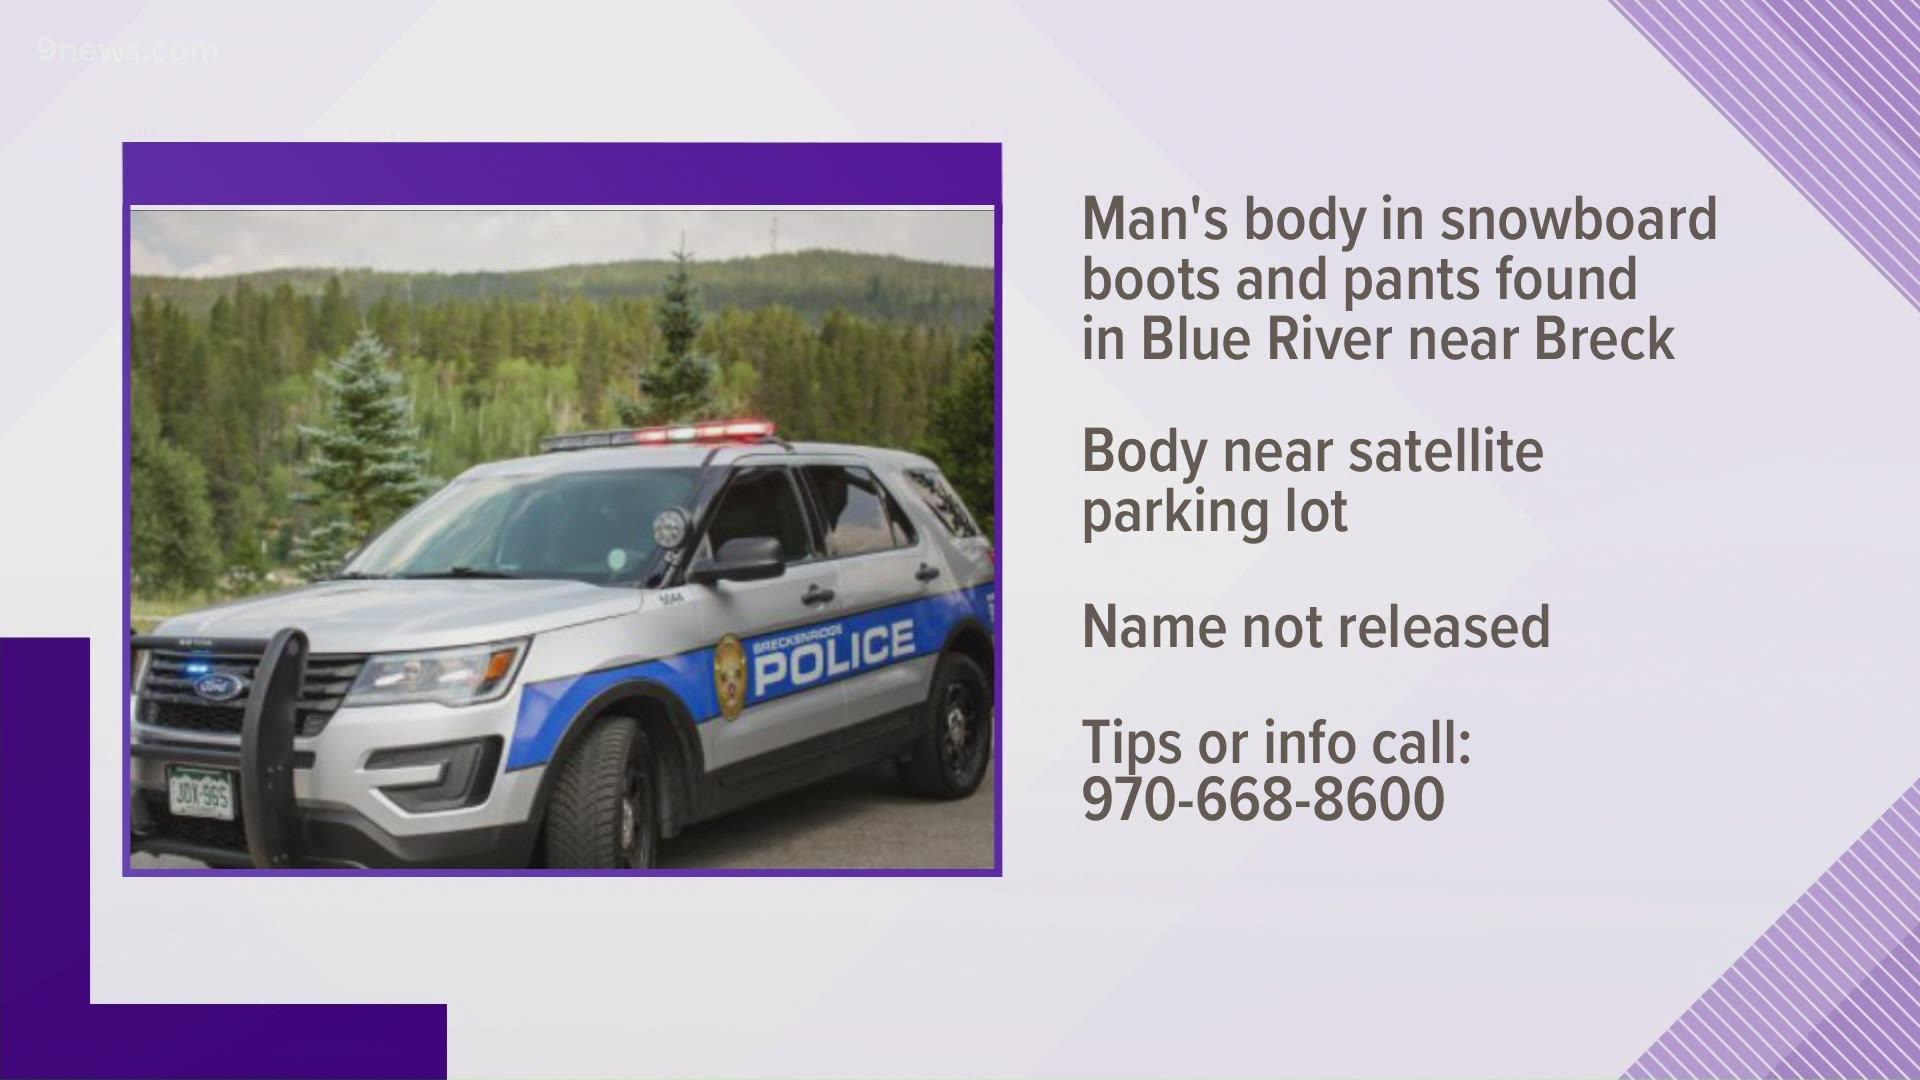 The man was wearing snowboarding boots and pants when his body was found in the river Monday afternoon.